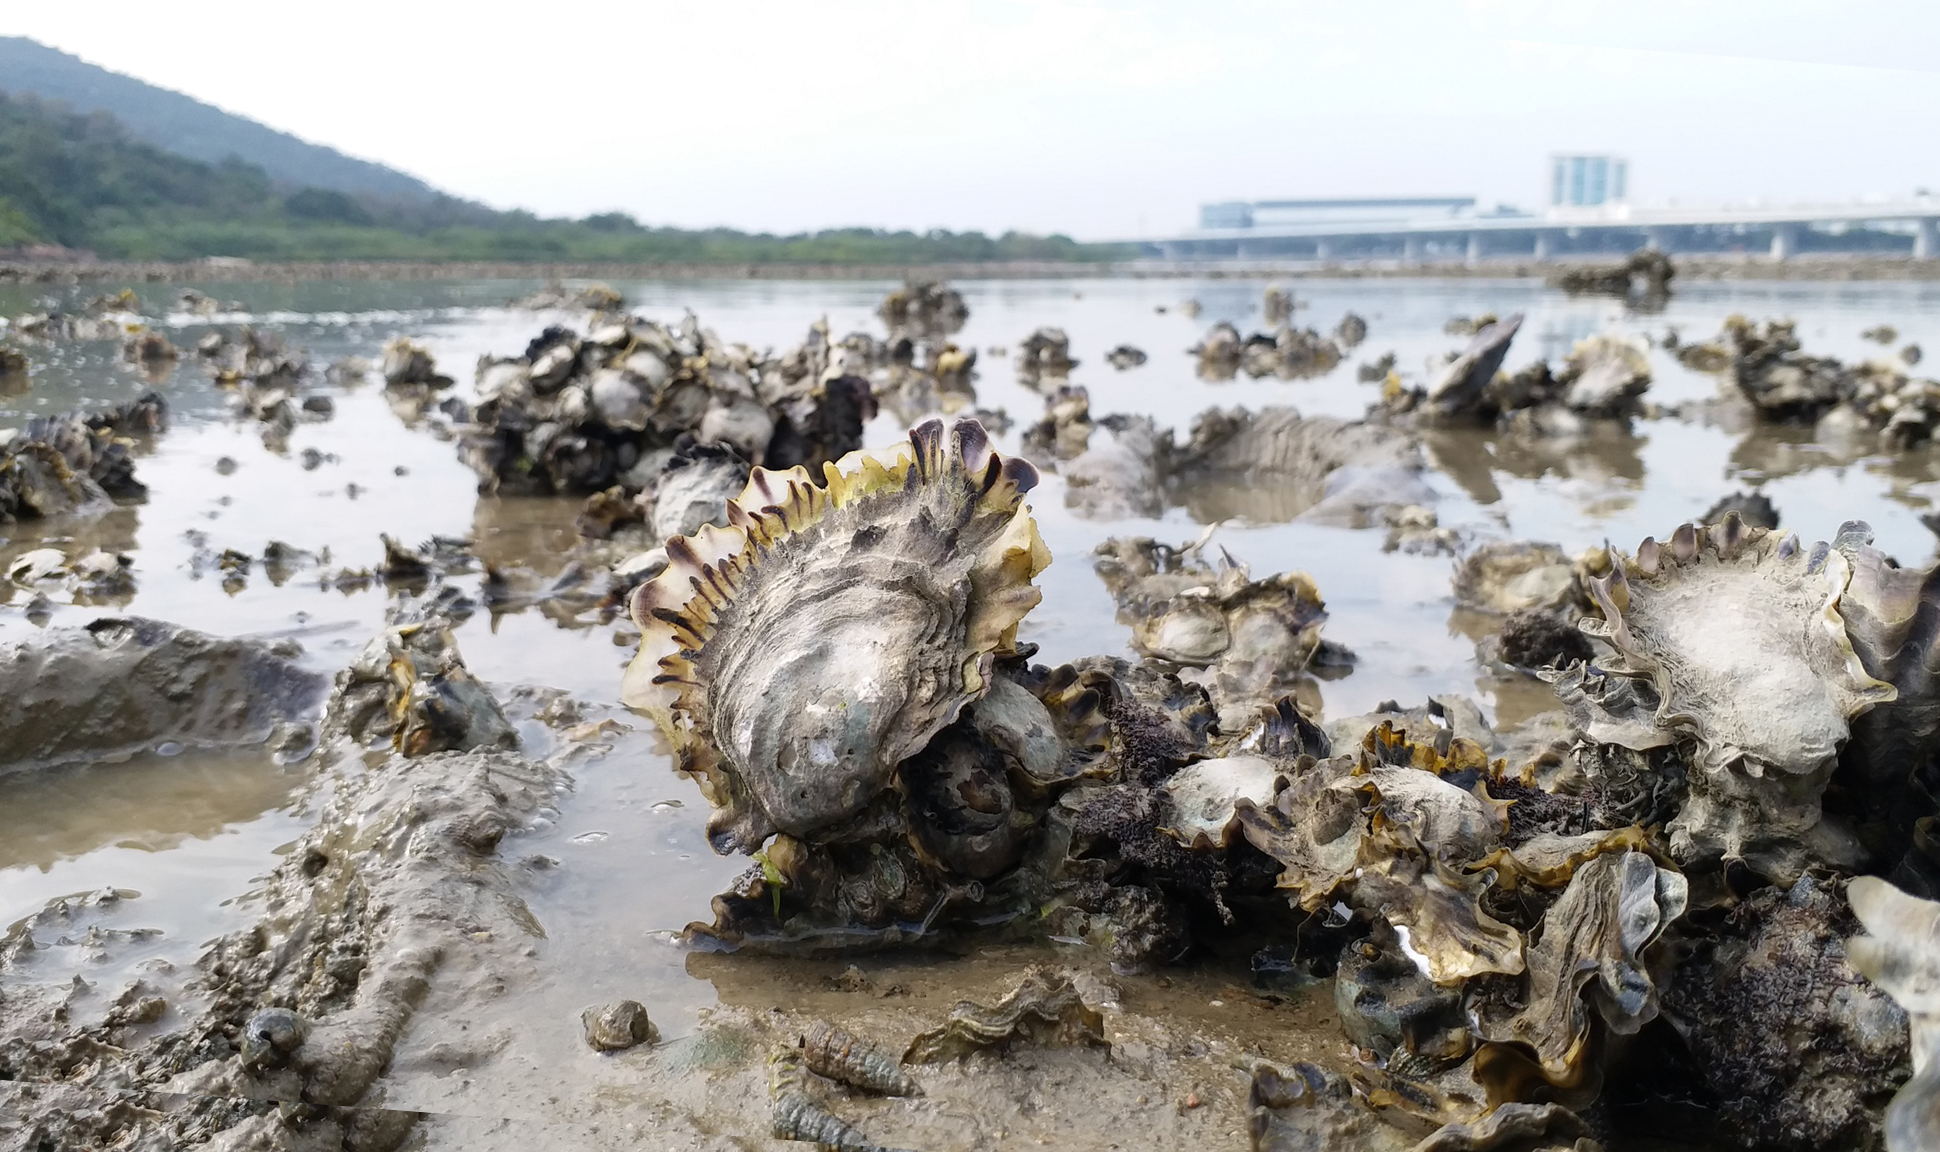 Close up of oysters exposed by receding tide.